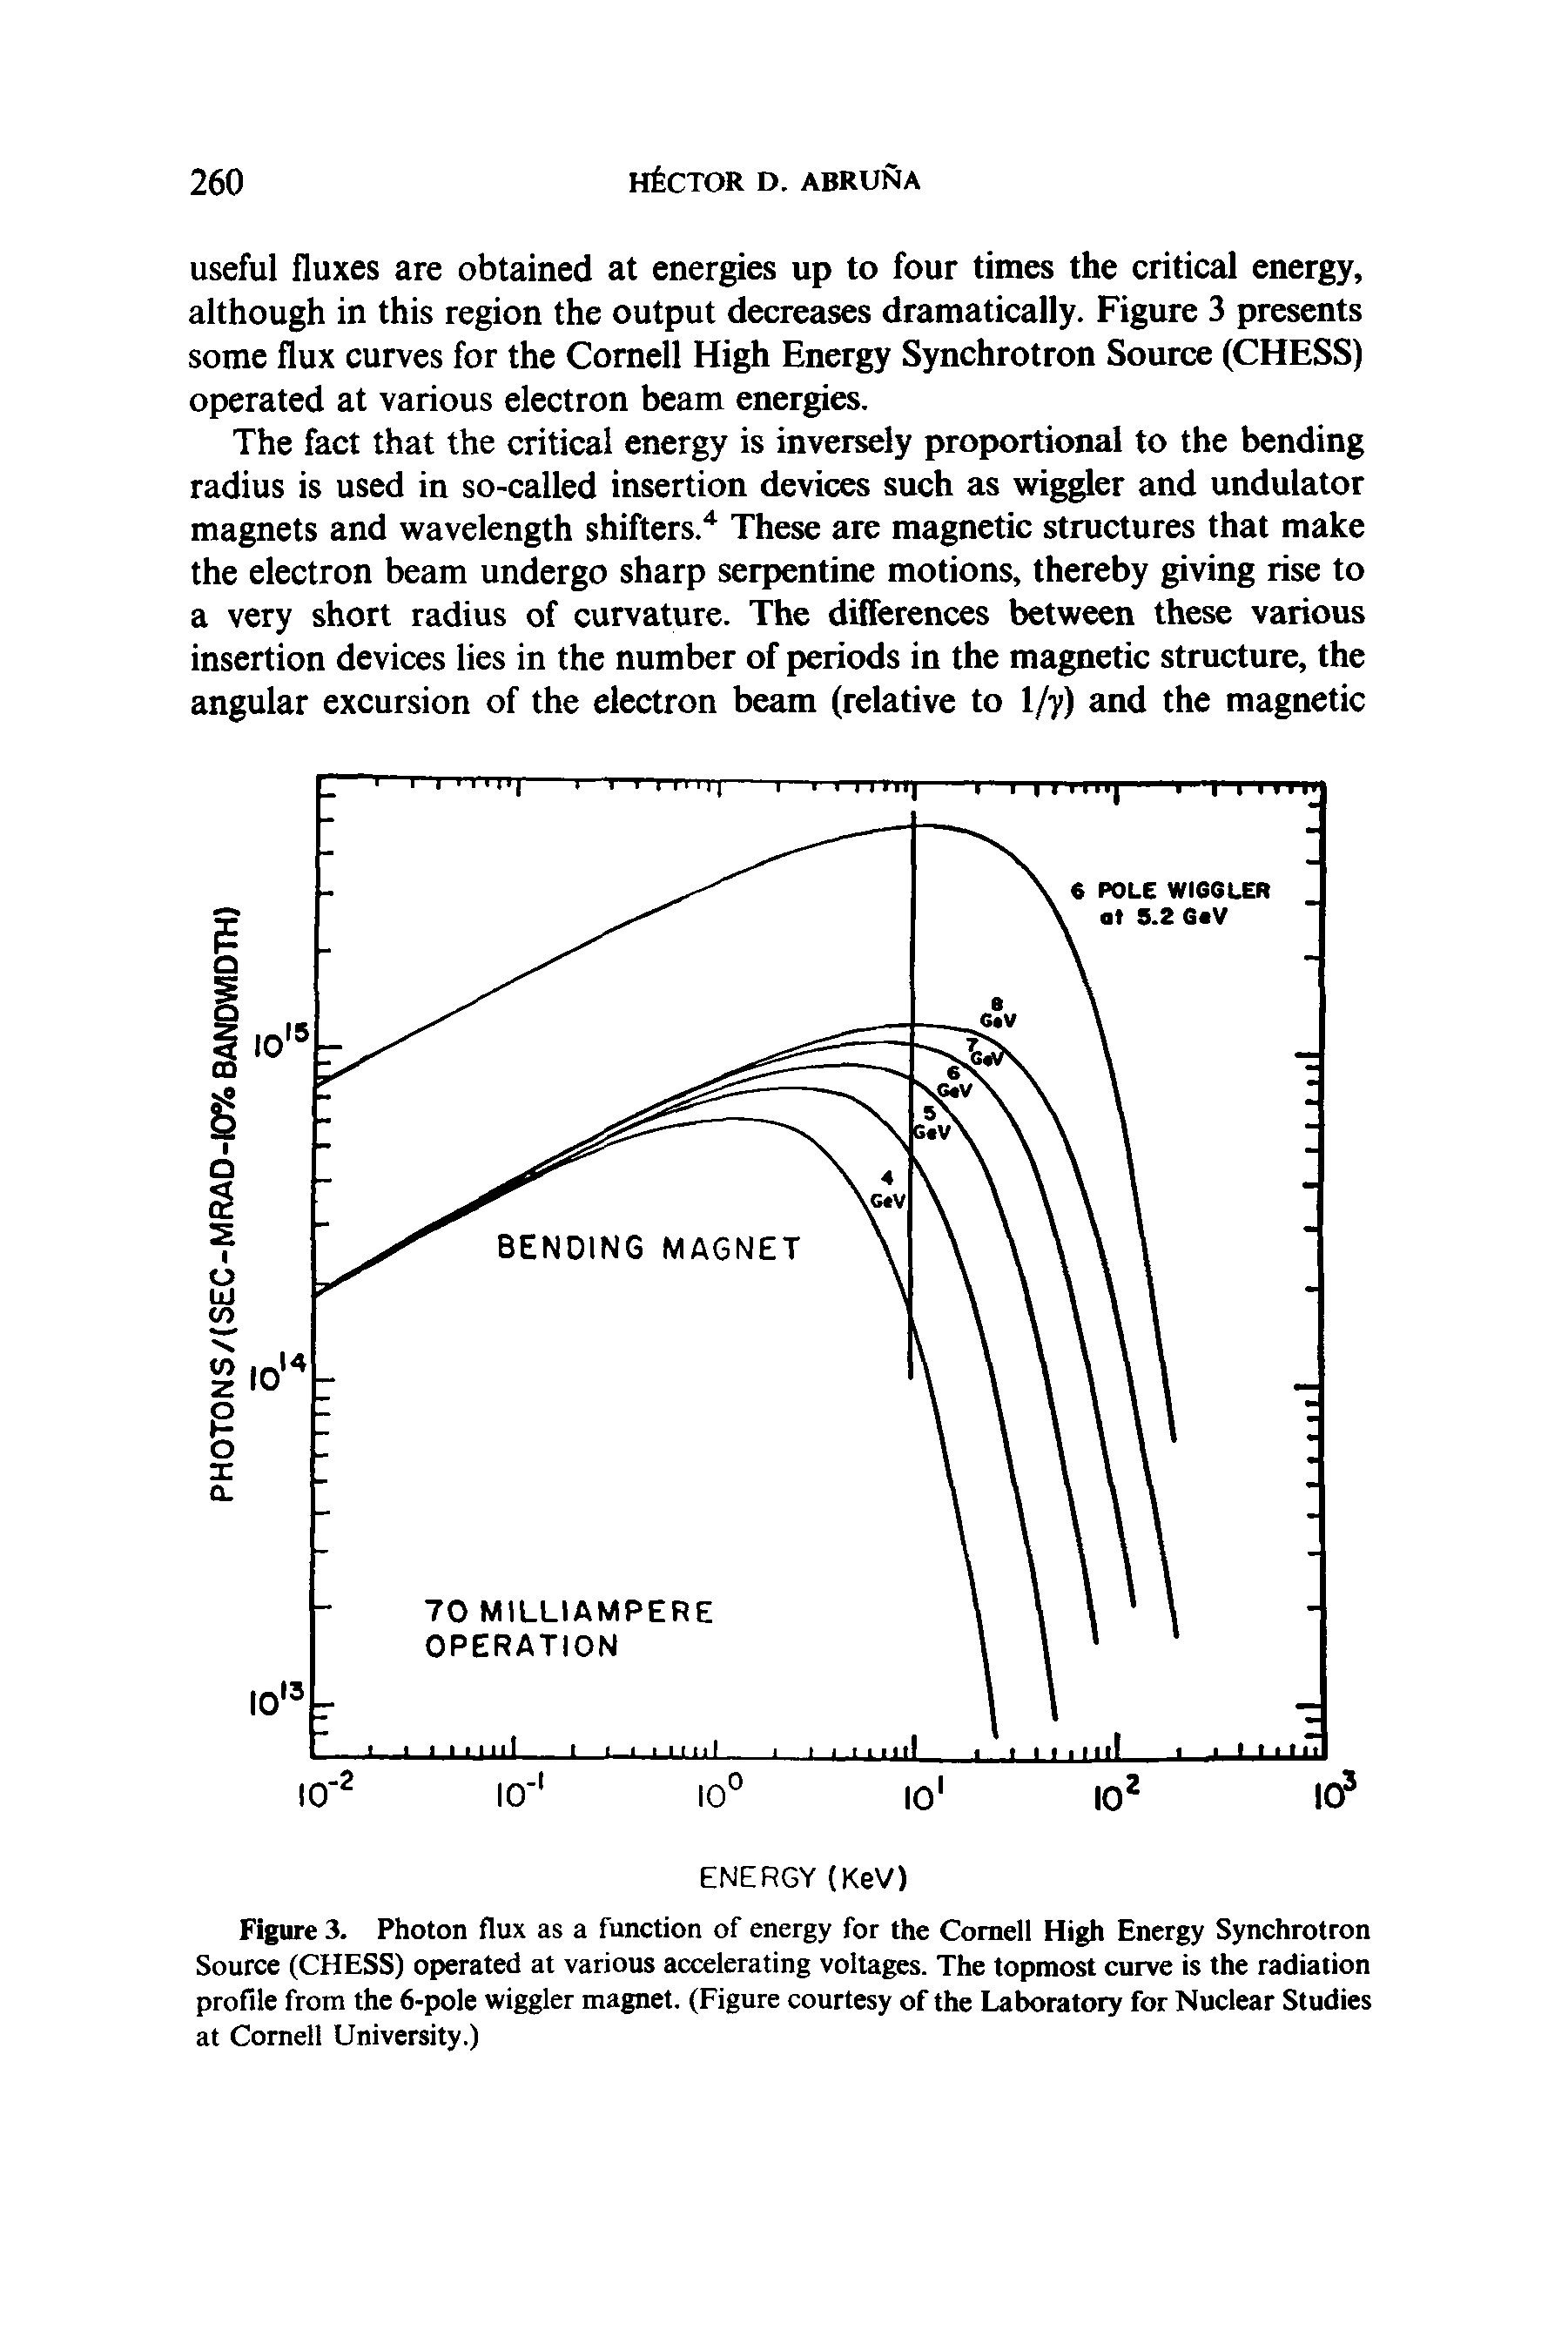 Figure 3. Photon flux as a function of energy for the Cornell High Energy Synchrotron Source (CHESS) operated at various accelerating voltages. The topmost curve is the radiation profile from the 6-pole wiggler magnet. (Figure courtesy of the Laboratory for Nuclear Studies at Cornell University.)...